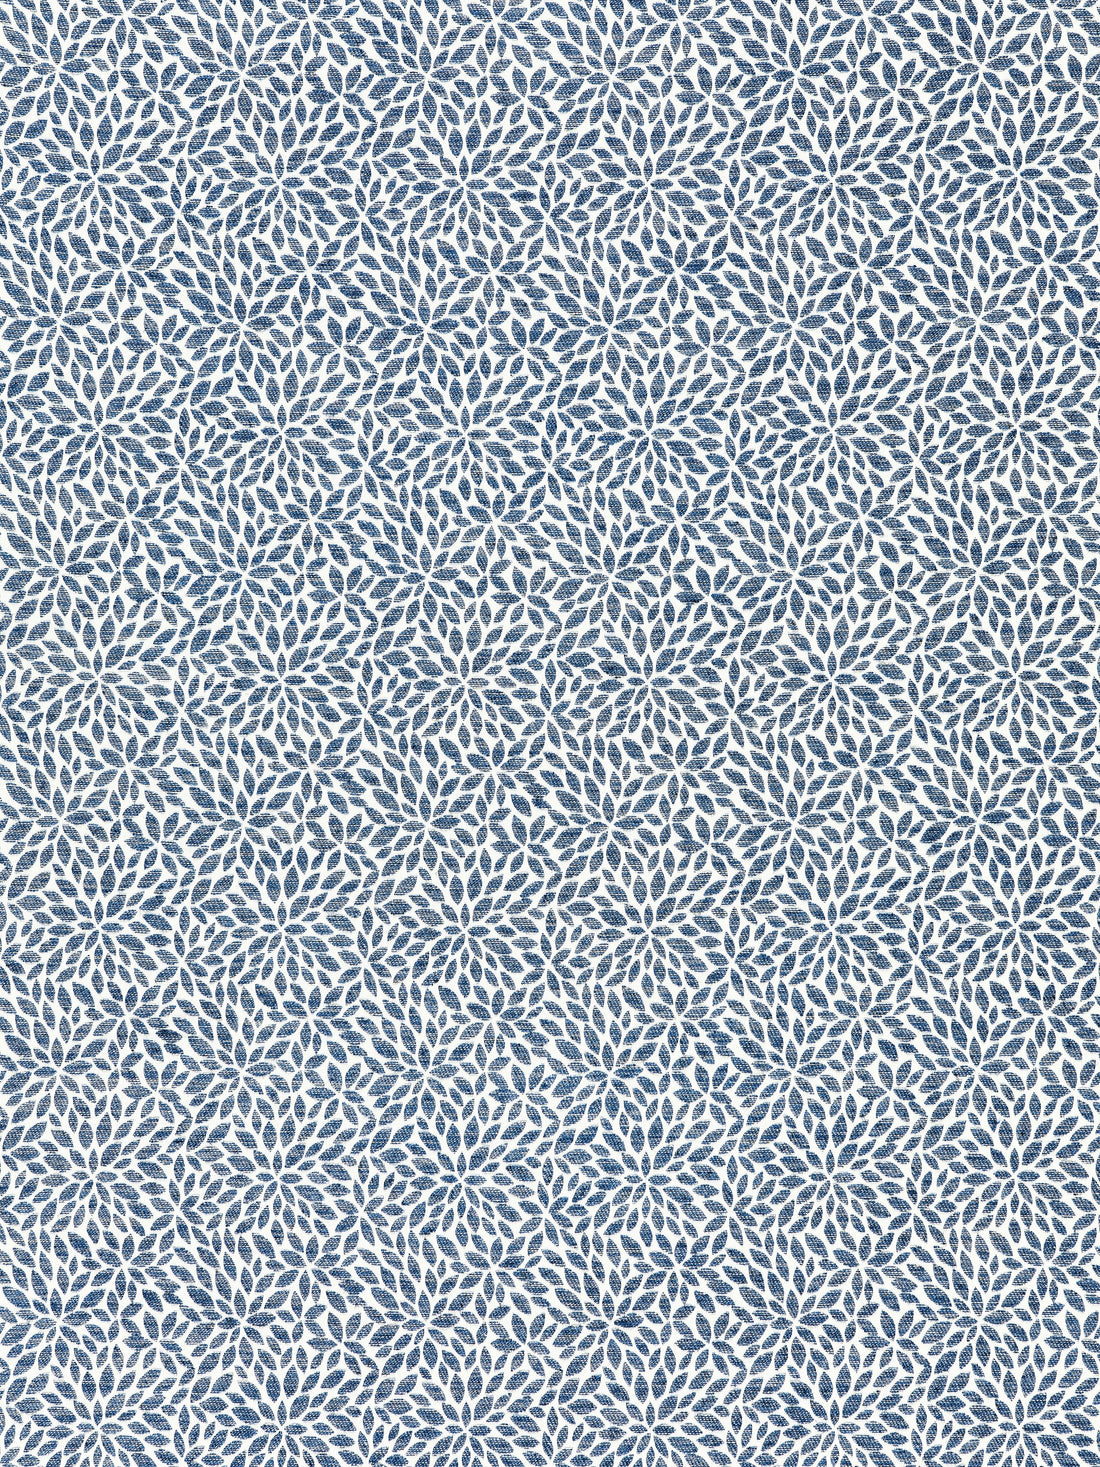 Risa Weave fabric in blue jay color - pattern number SC 000327239 - by Scalamandre in the Scalamandre Fabrics Book 1 collection